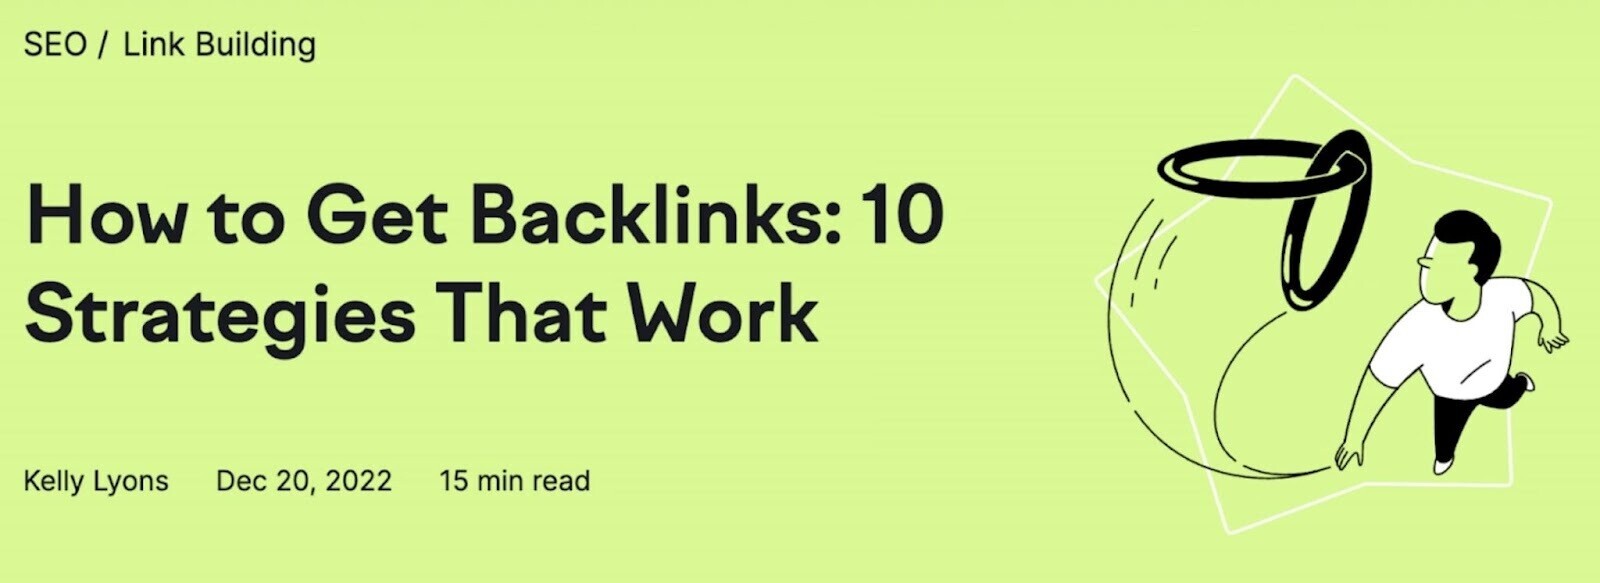 "How to Get Backlinks: 10 Strategies That Work" title